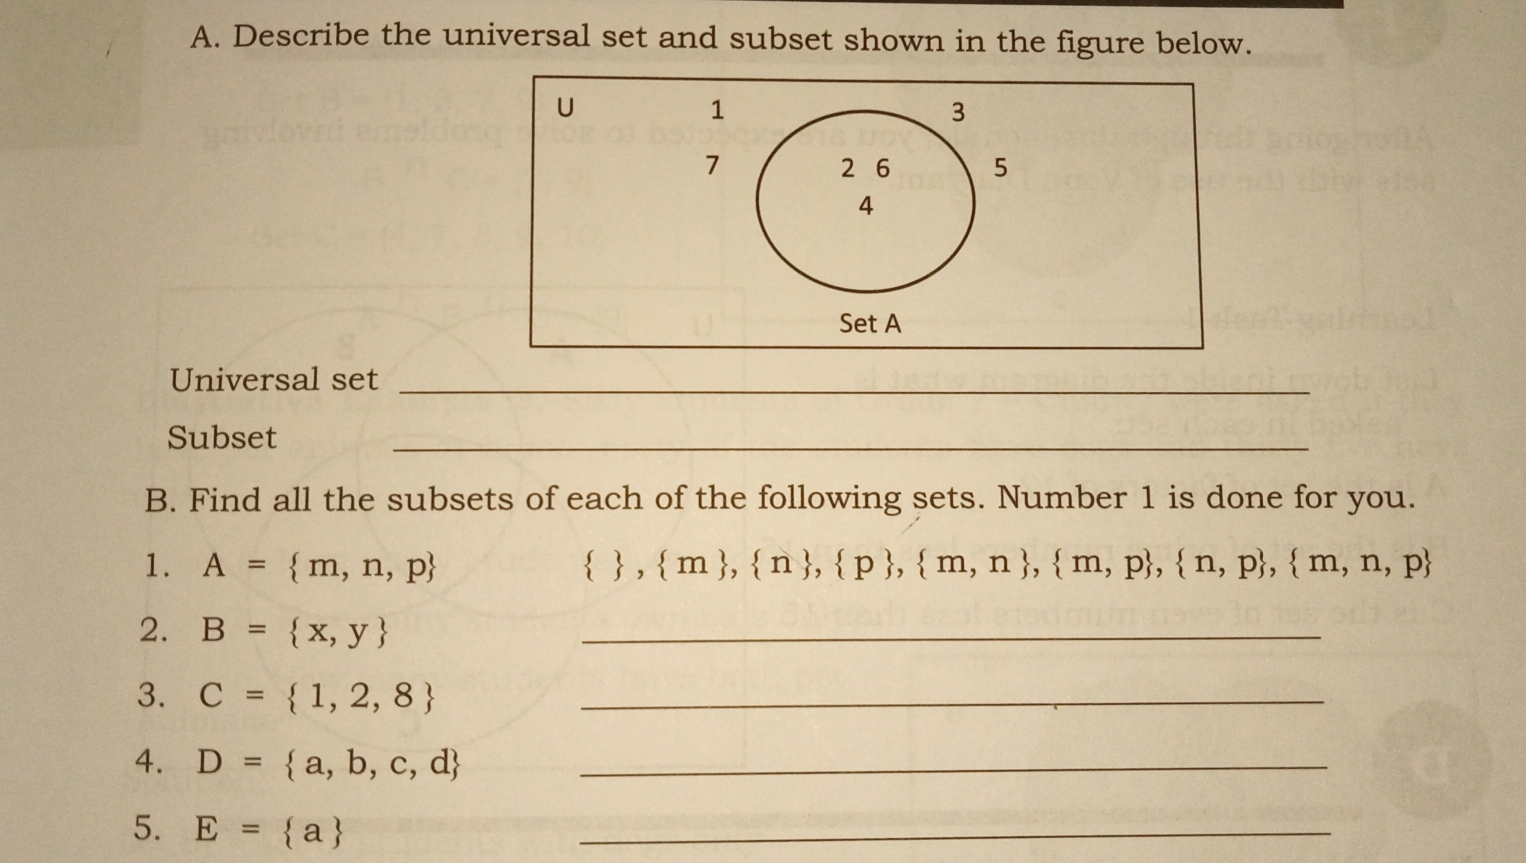 A. Describe the universal set and subset shown in the figure below. U 1 7 Set A Universal set Subset _ B. Find all the subsets of each of the following sets. Number 1 is done for you. 1. A = m,n,p , m n p m,n m,p , n, p, m,n,p 2. B = x,y 3. C = 1,2,8 4. D = a,b,c,d 5. E = a _